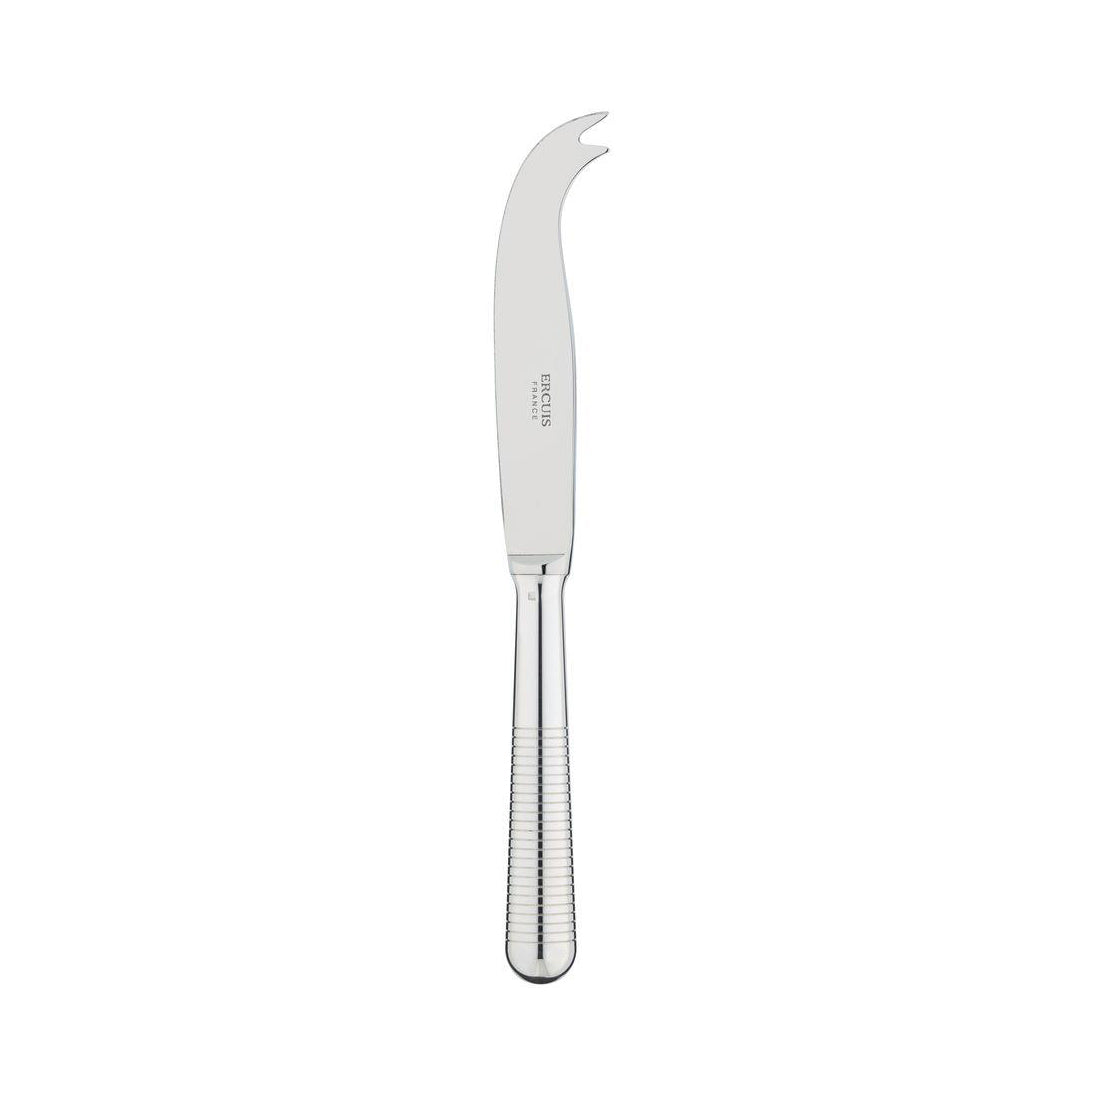 ERCUIS TRANSAT TWO PRONG CHEESE KNIFE SILVER PLATED